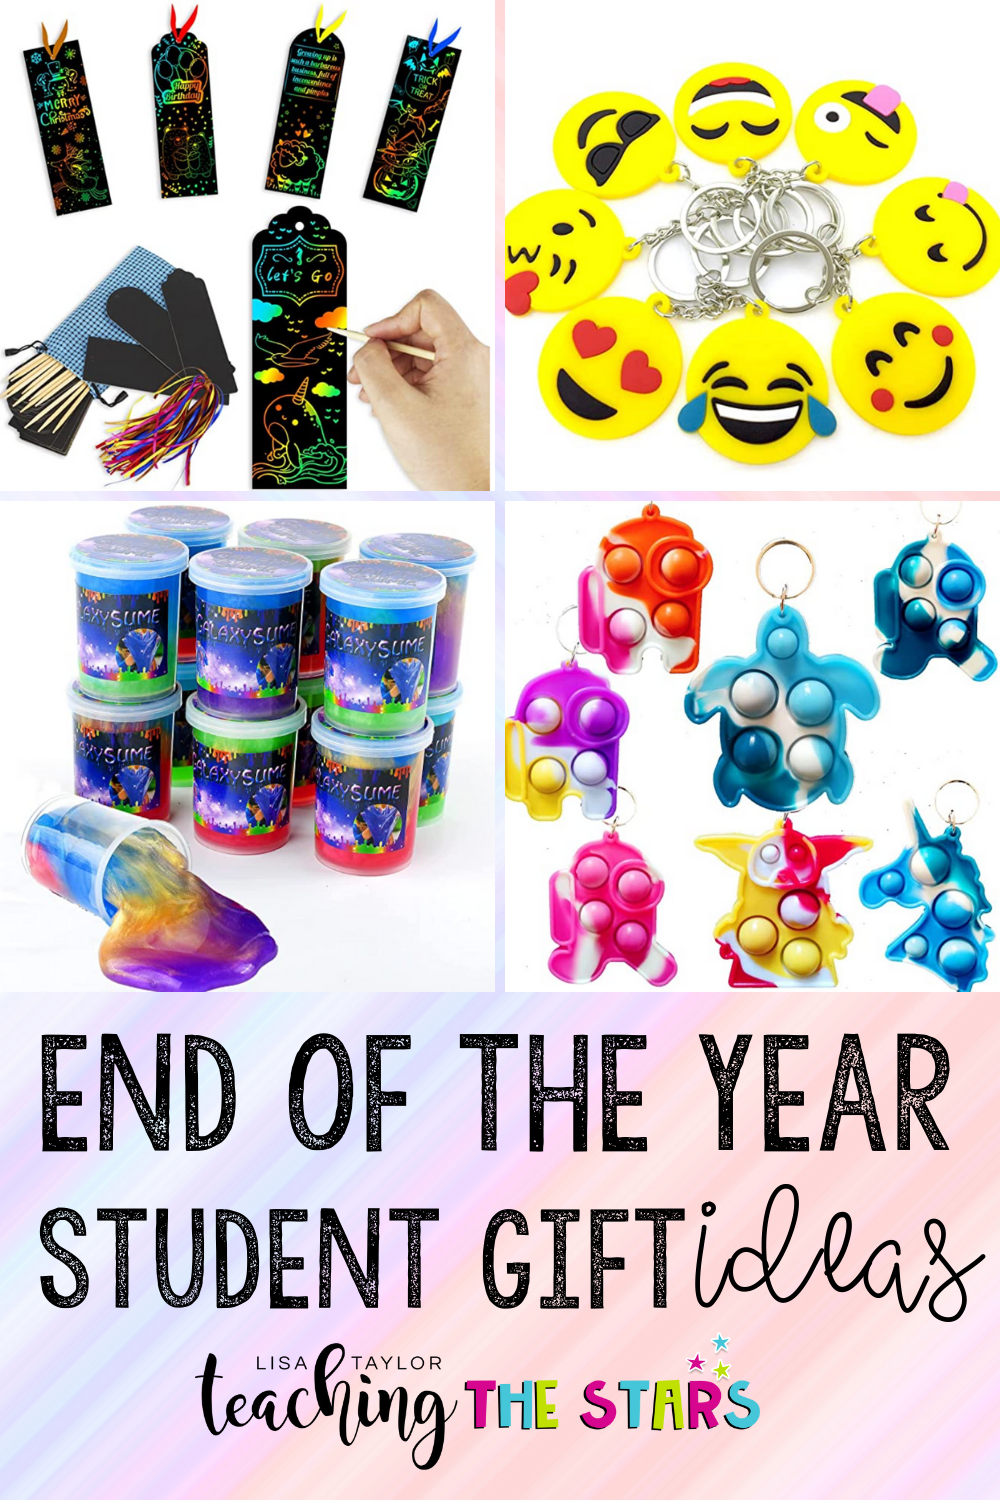 Classroom Birthday Gift Ideas For Students | Fun365